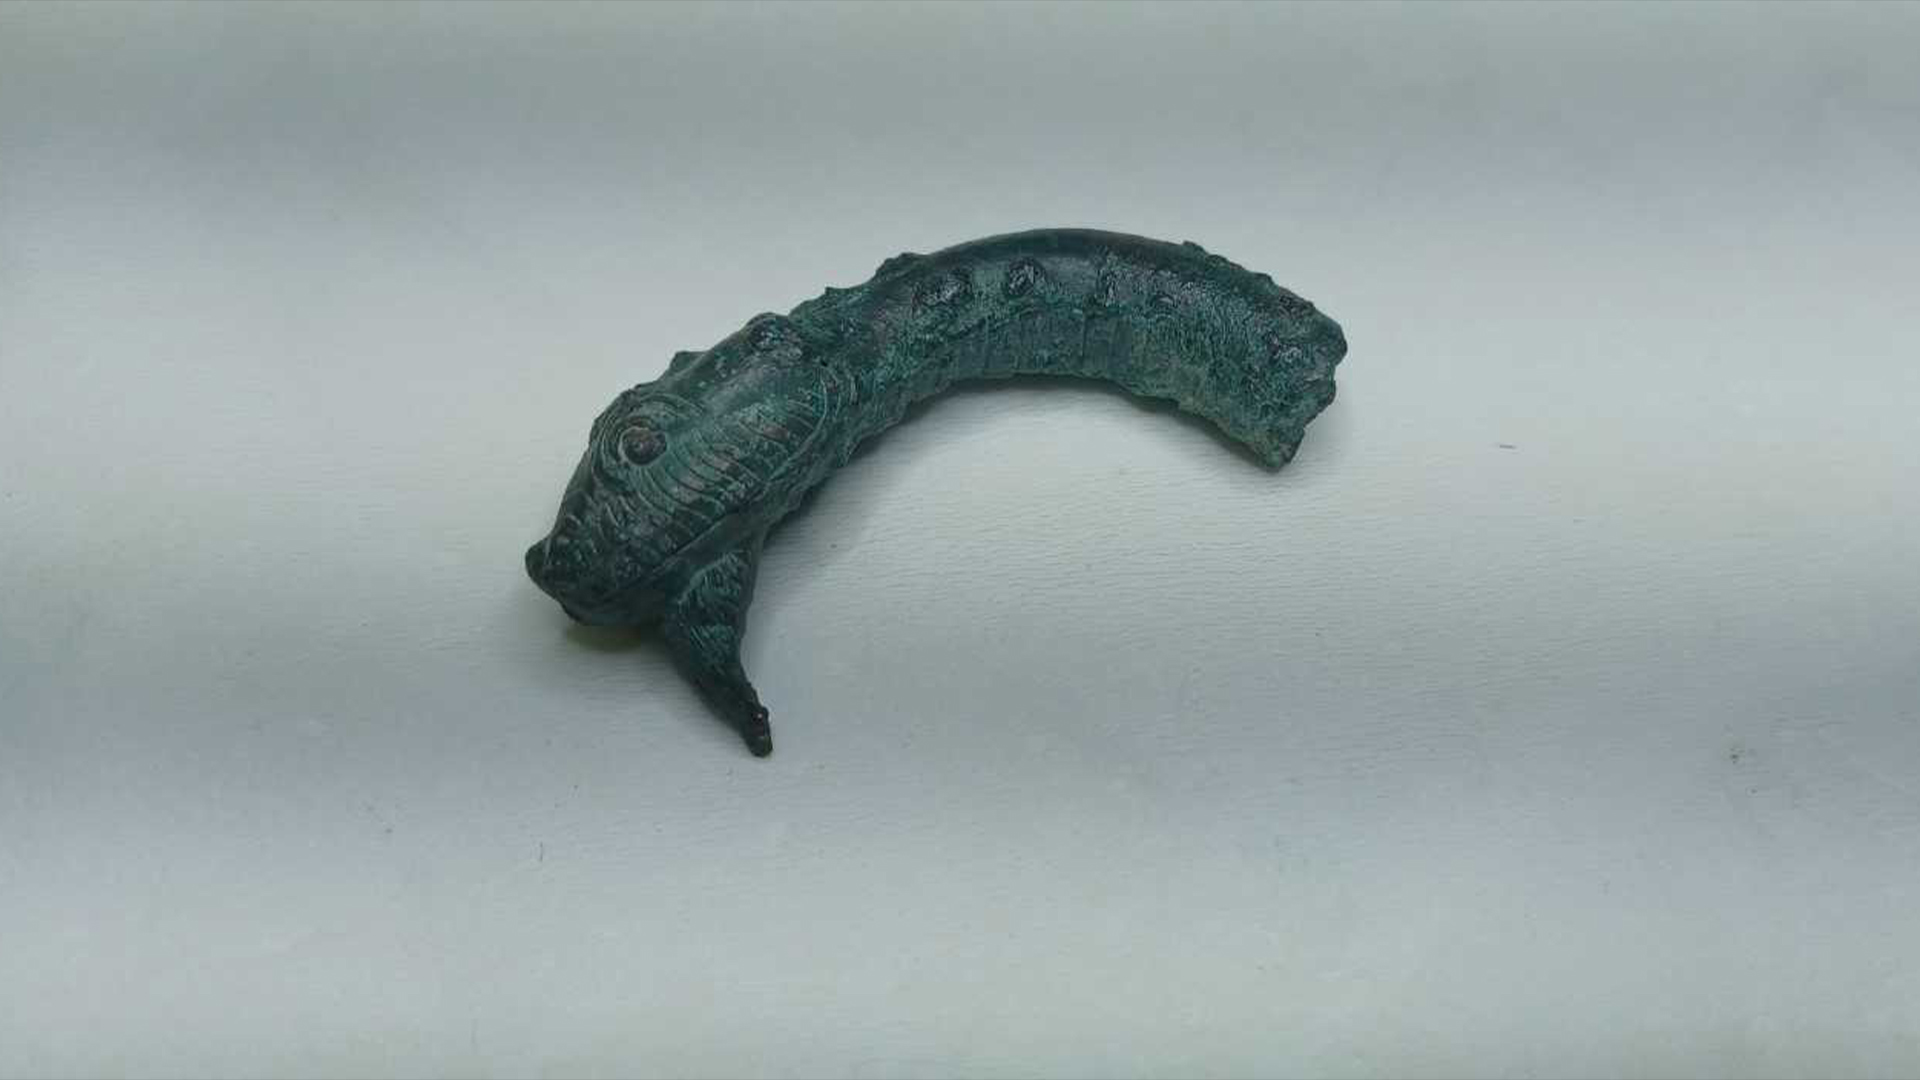 A bronze serpent head, likely from a scepter, that archaeologists found at the site.